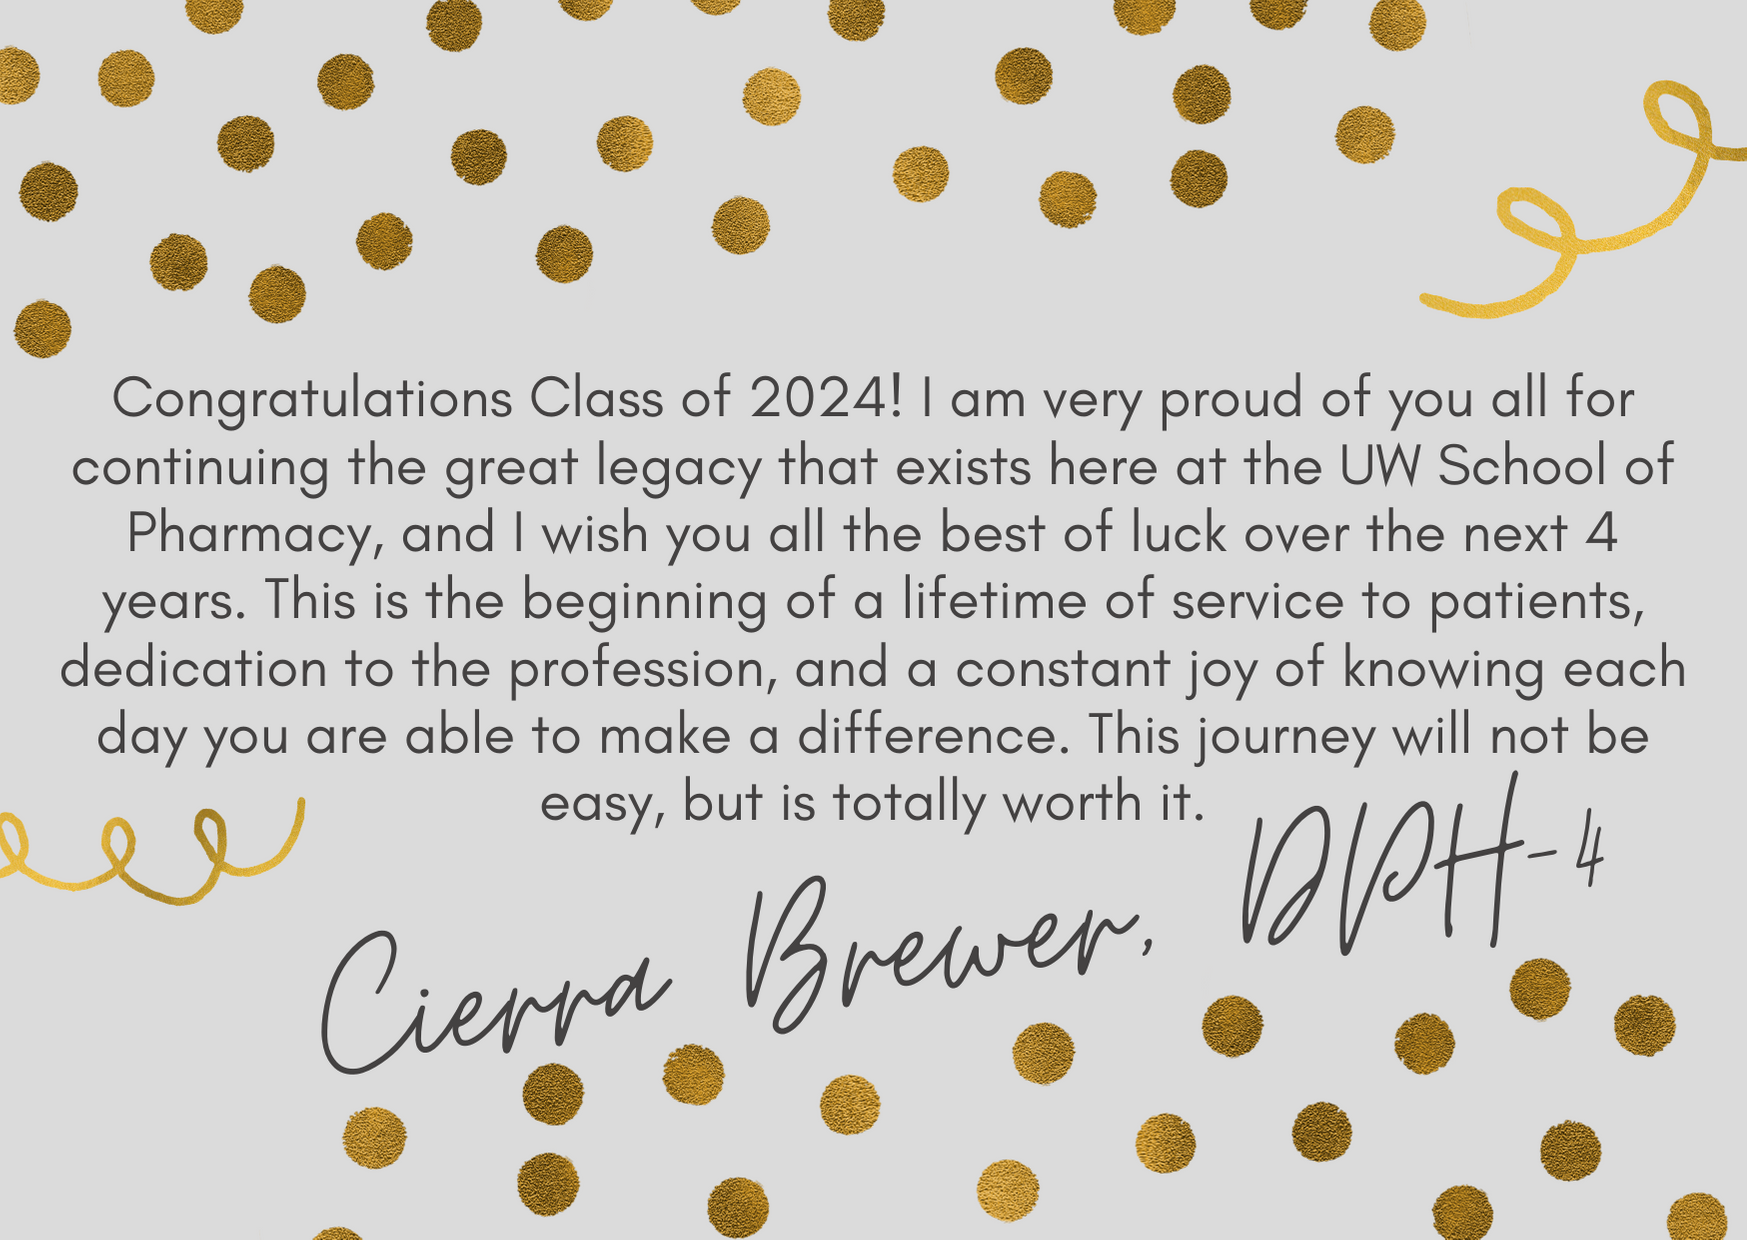 Cierra Brewer's note for the White Coat ceremony to the class of 2024